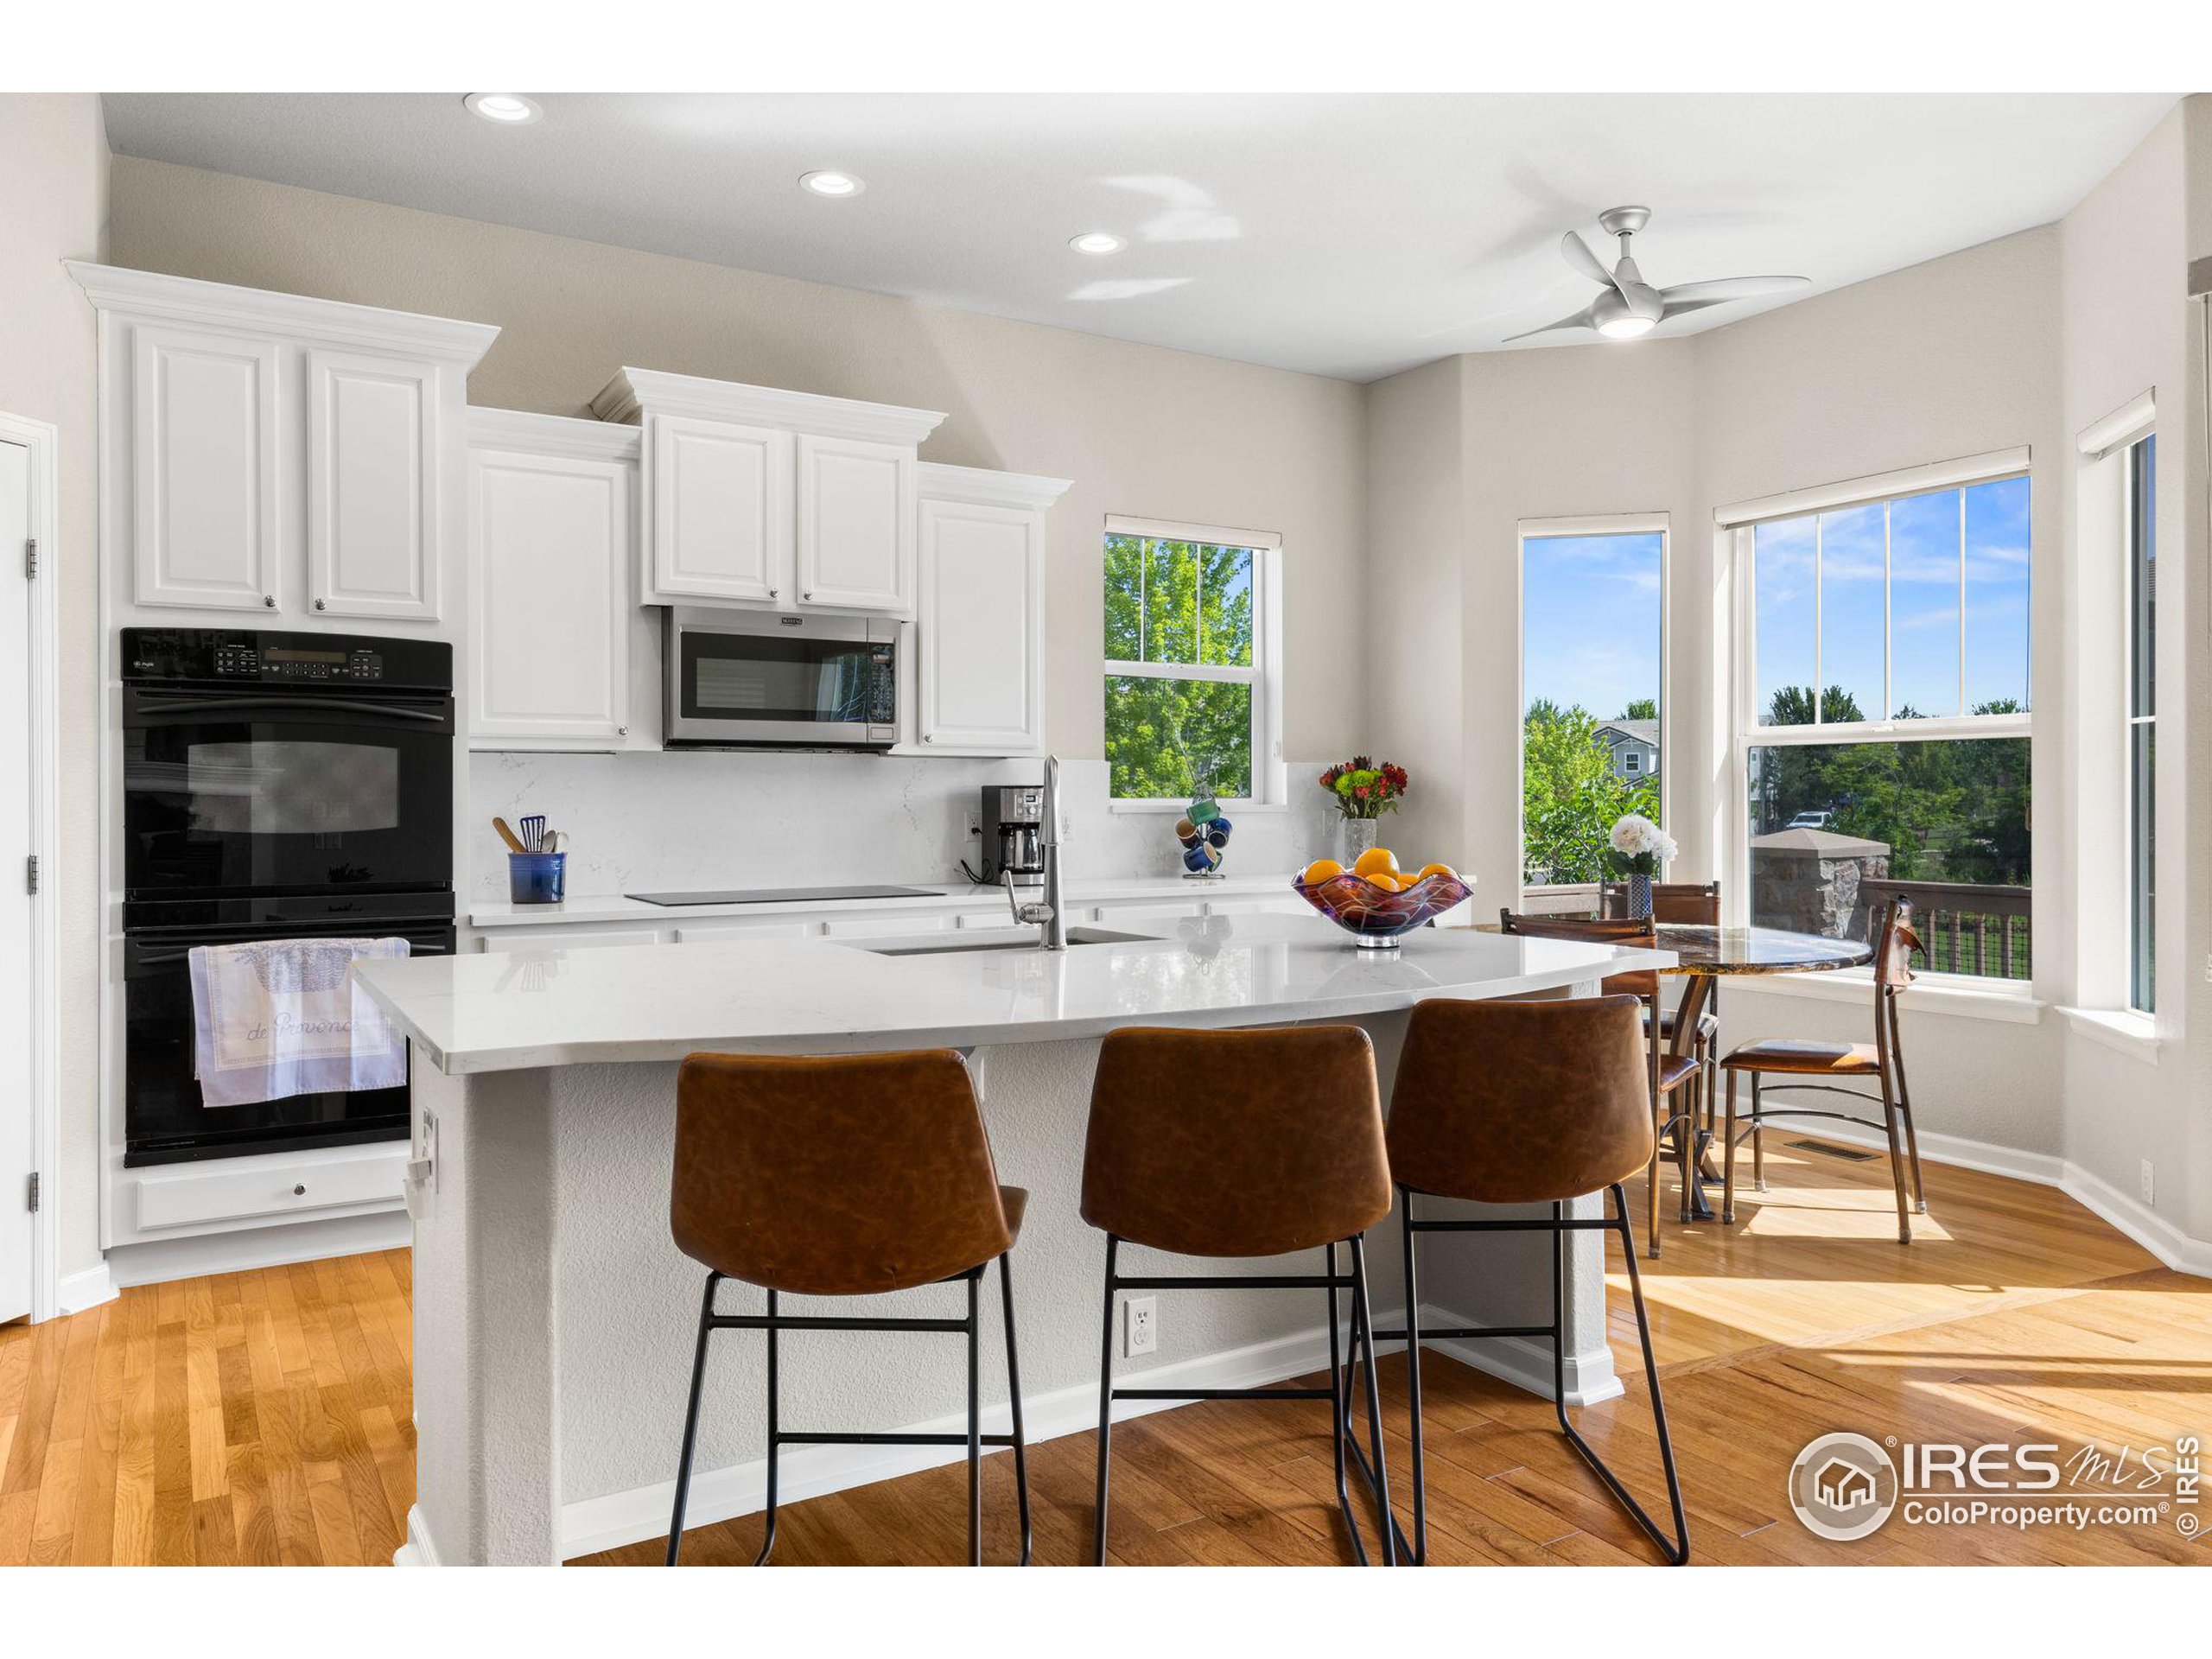 a open kitchen with stainless steel appliances granite countertop a stove top oven a sink a dining table and chairs